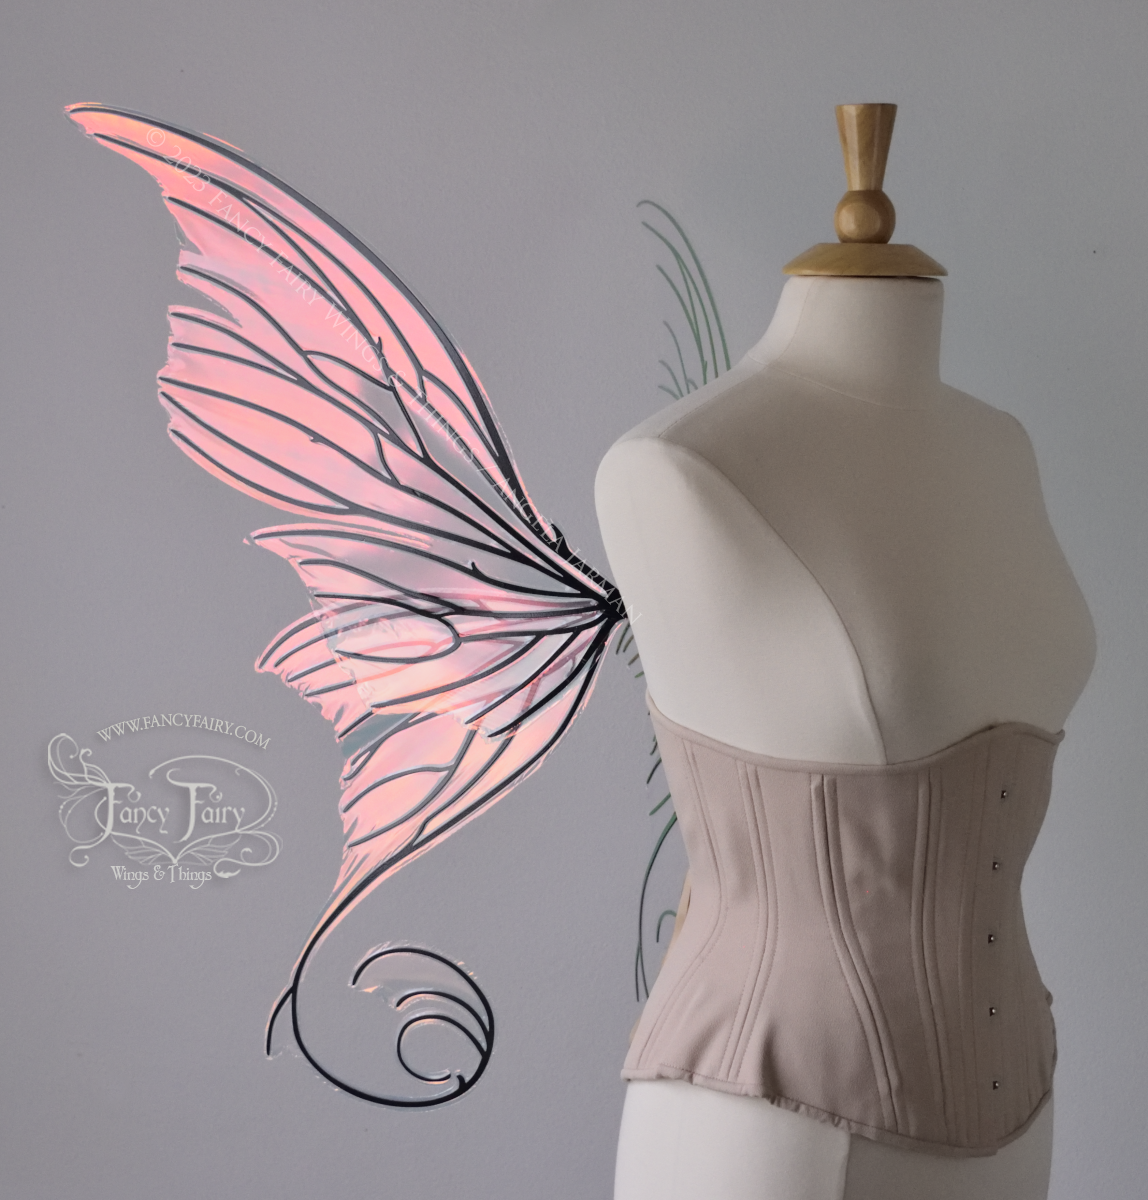 Aphrodite Convertible Iridescent Fairy Wings in Blush with Black Veins, Ready to Ship